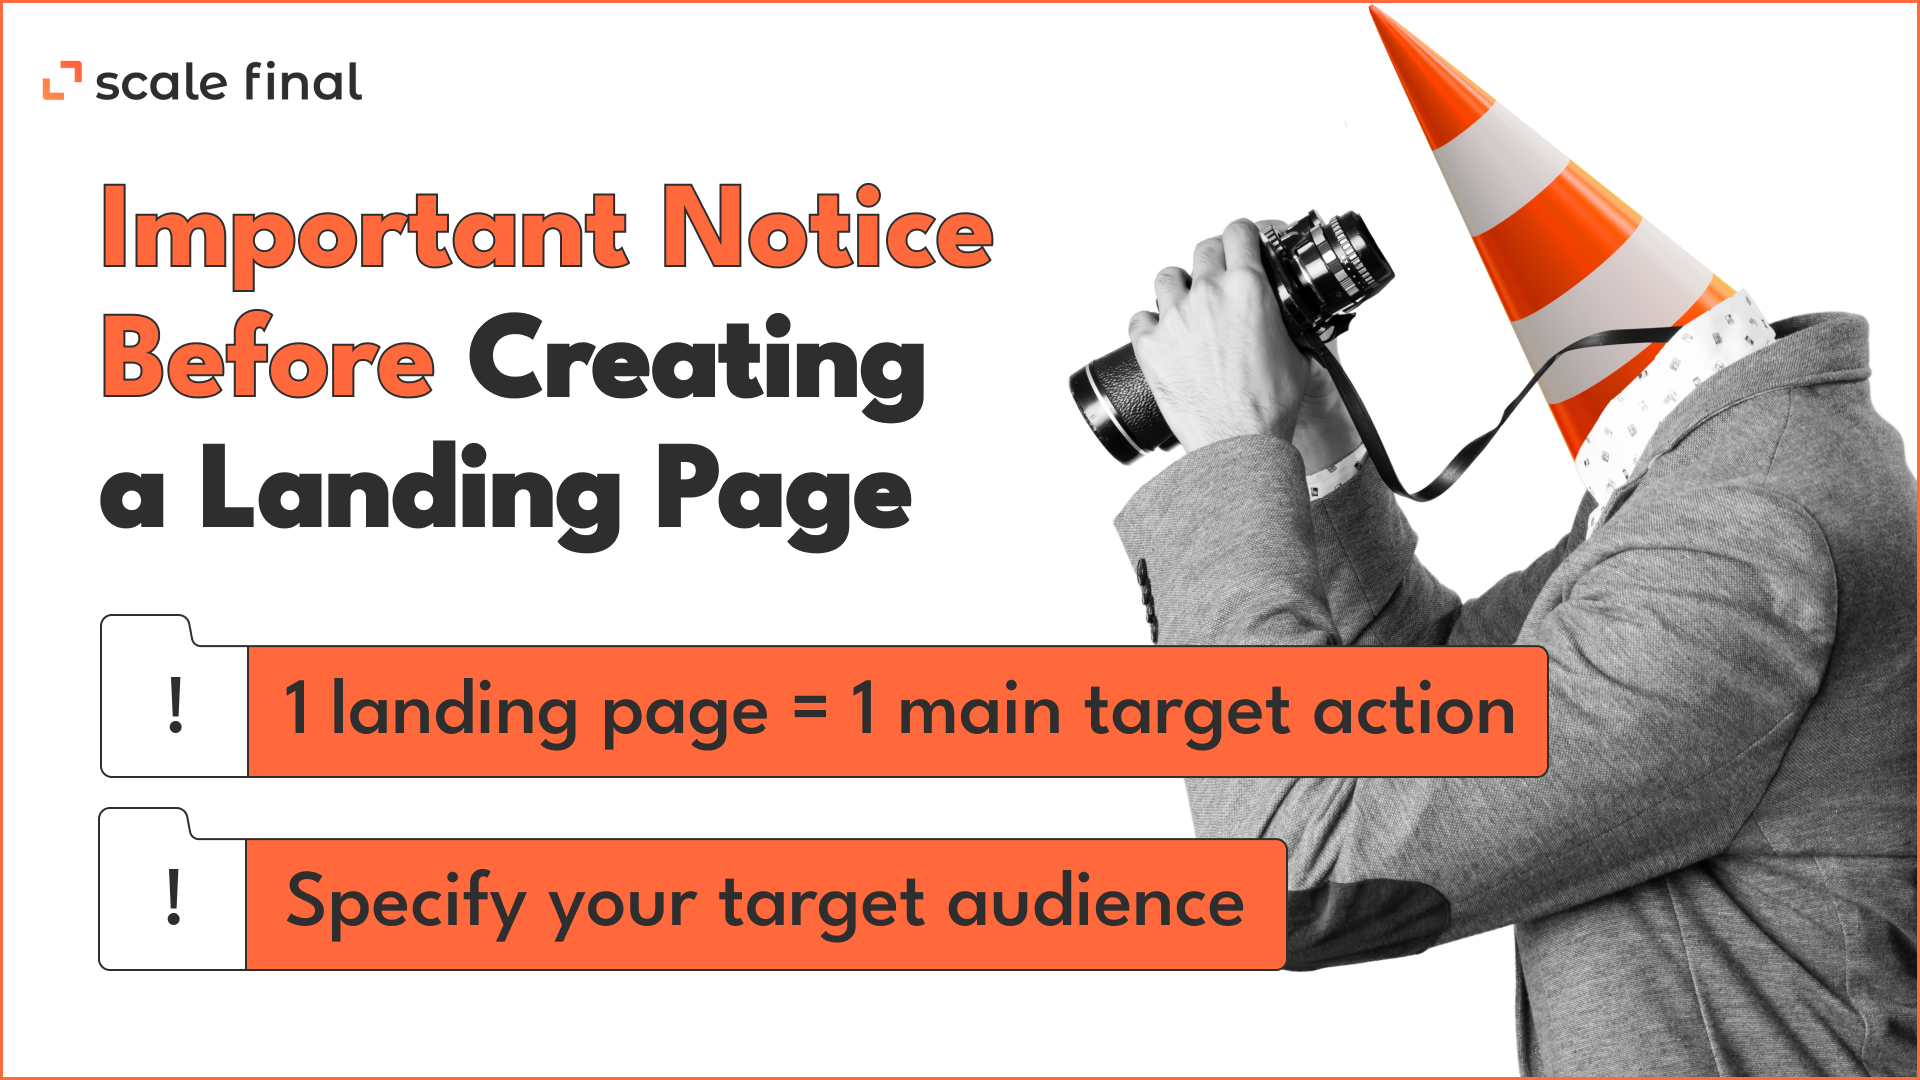 Important Notice Before Creating a Landing Page